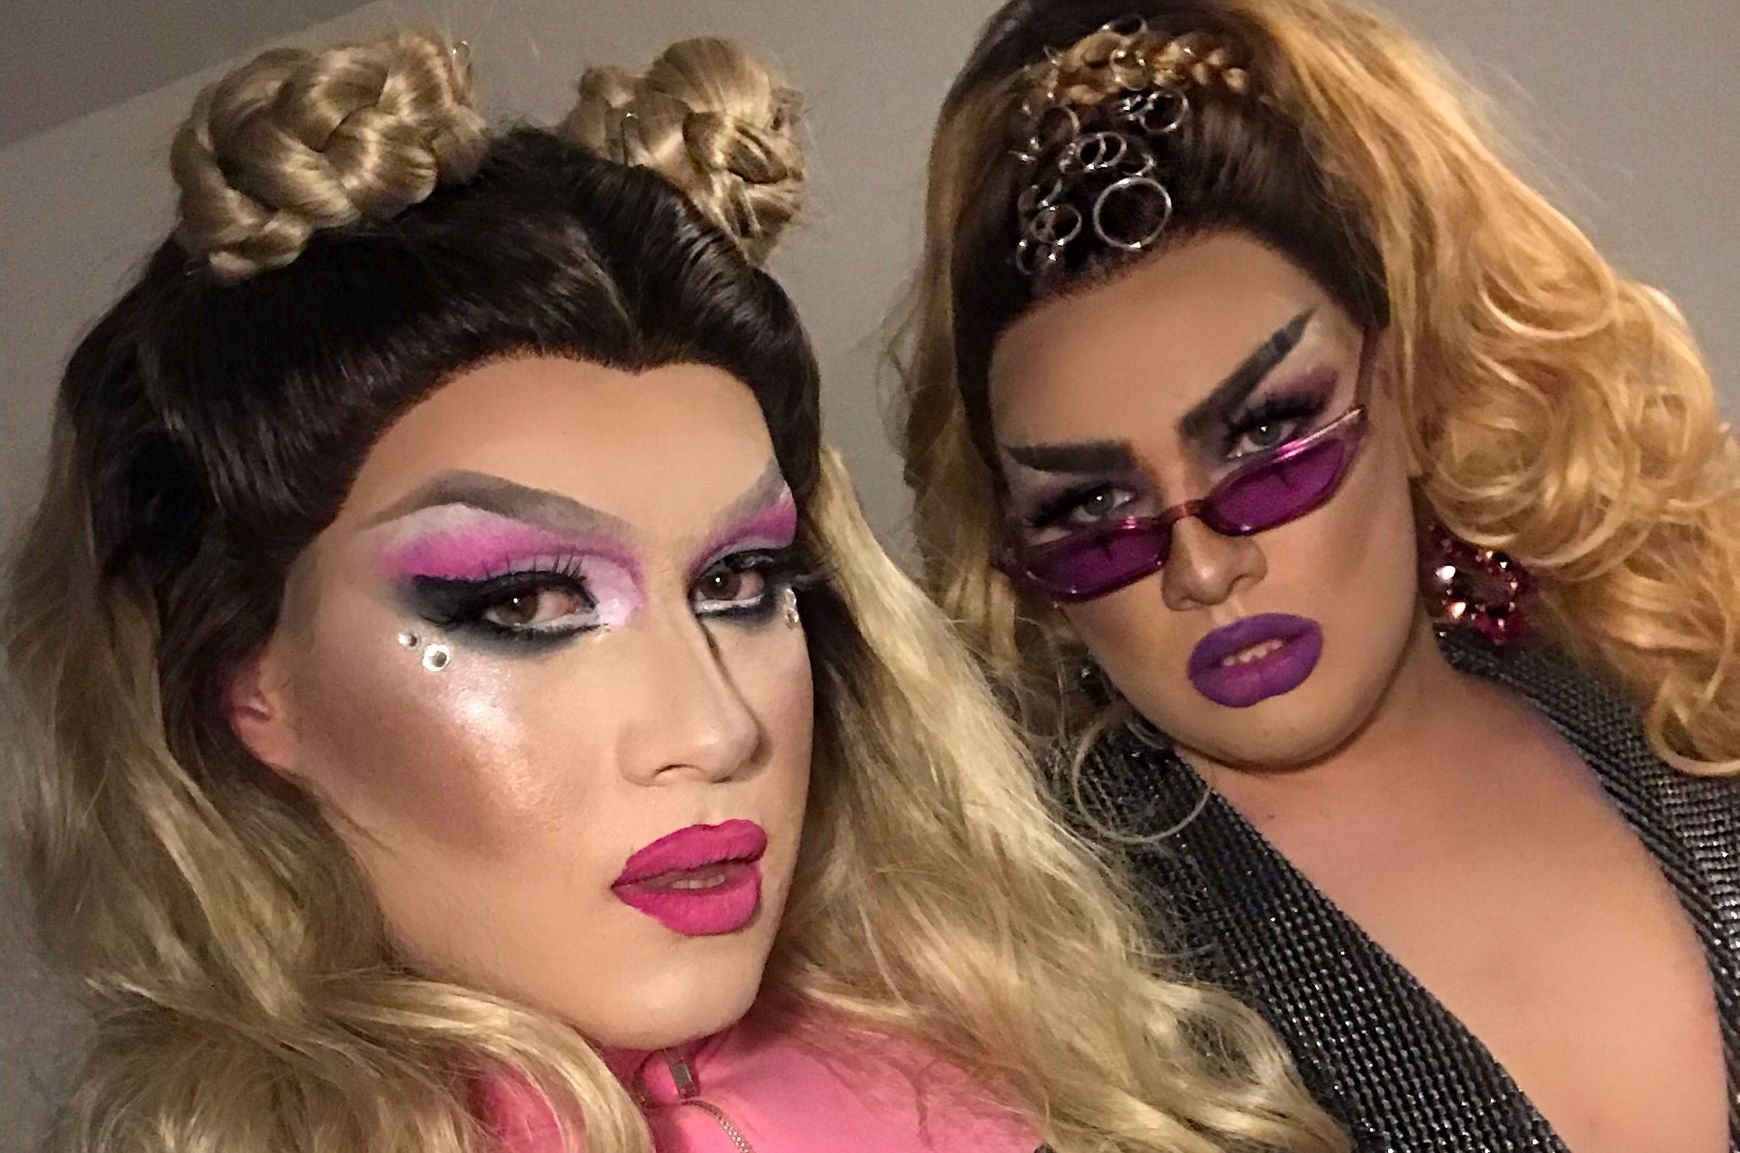 ‘It’s a double life’: family rejection and finding a new home in the drag community